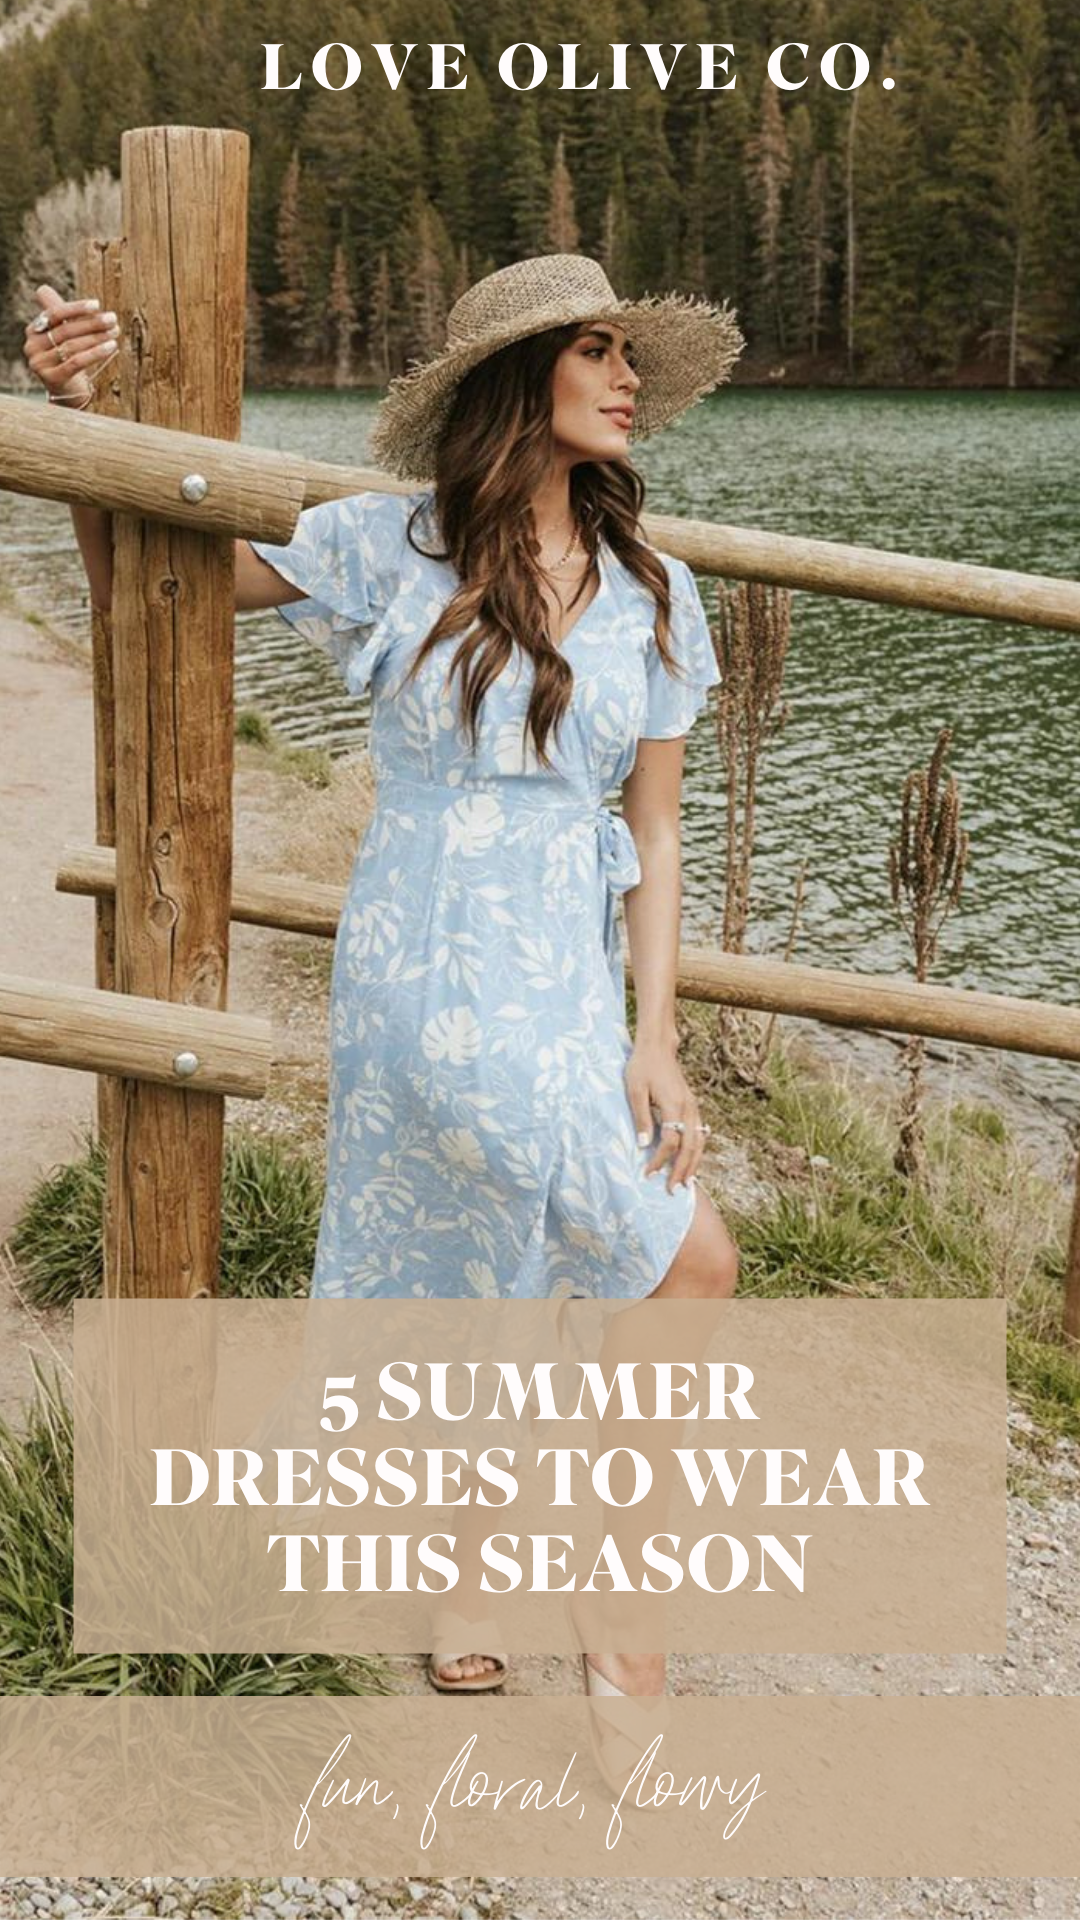 5 summer dresses to wear this season. www.loveoliveco.com